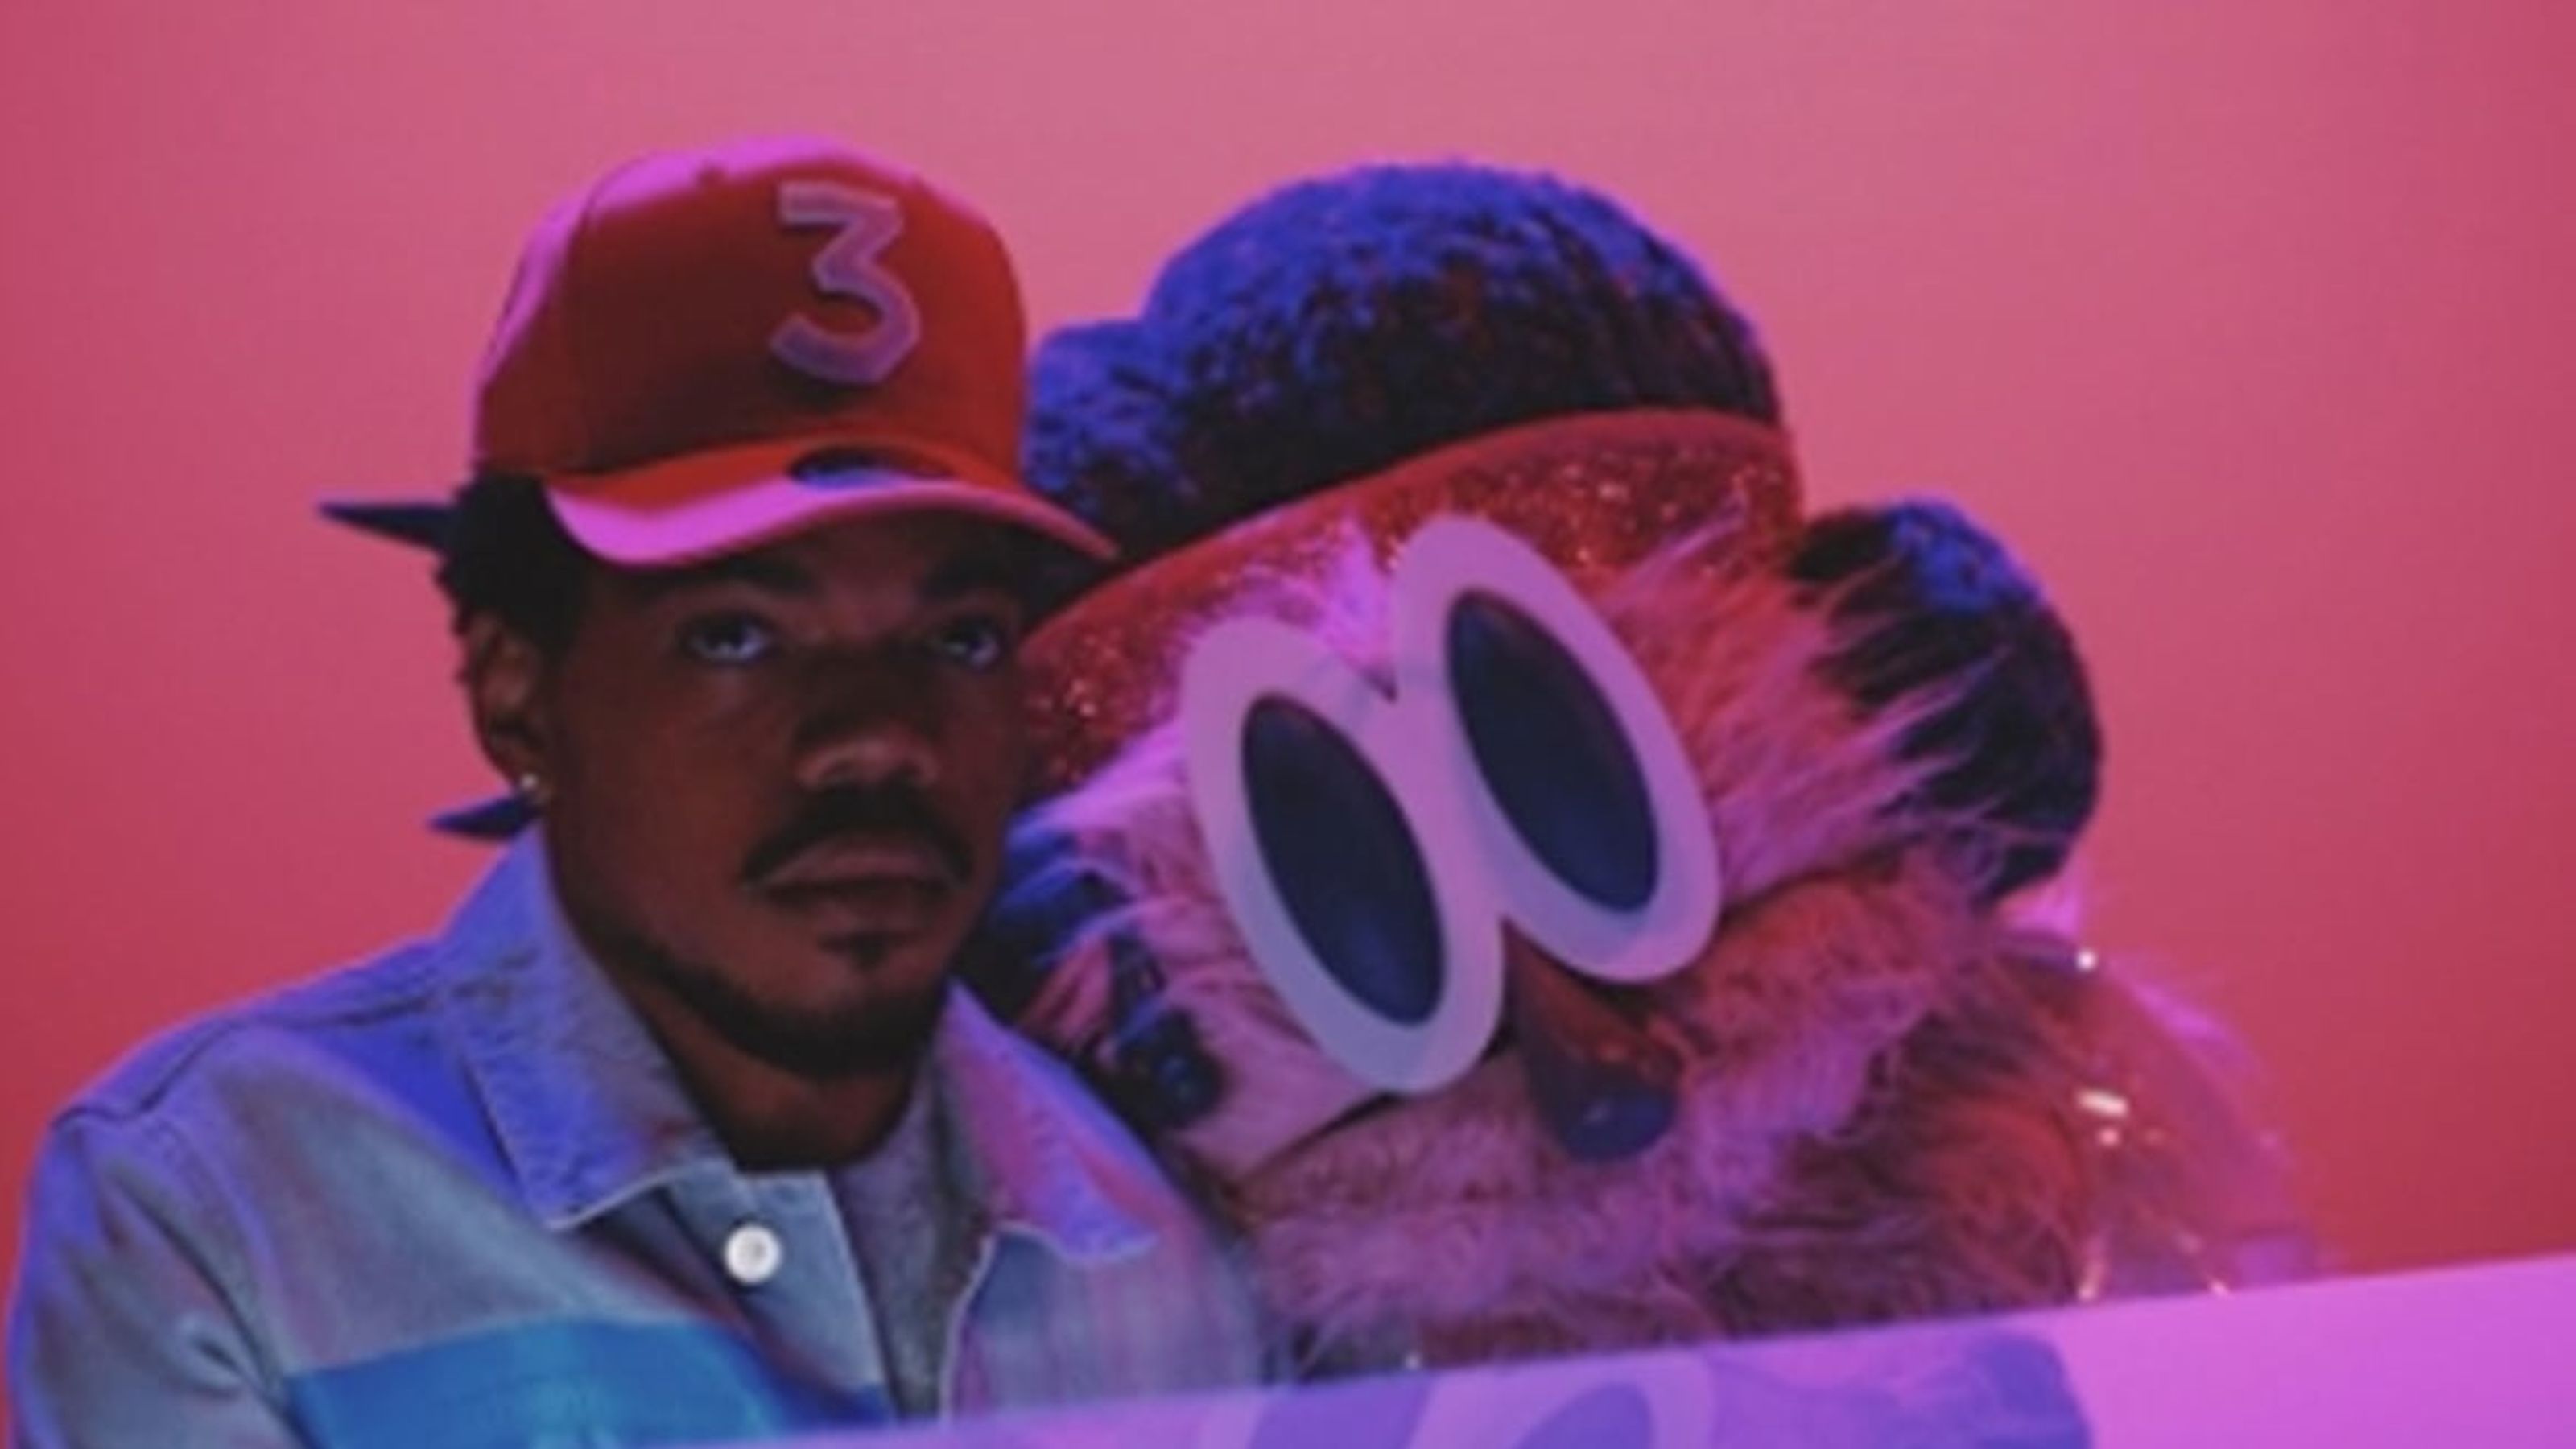 Francis and the Lights ft. Chance the Rapper “May I Have This Dance”